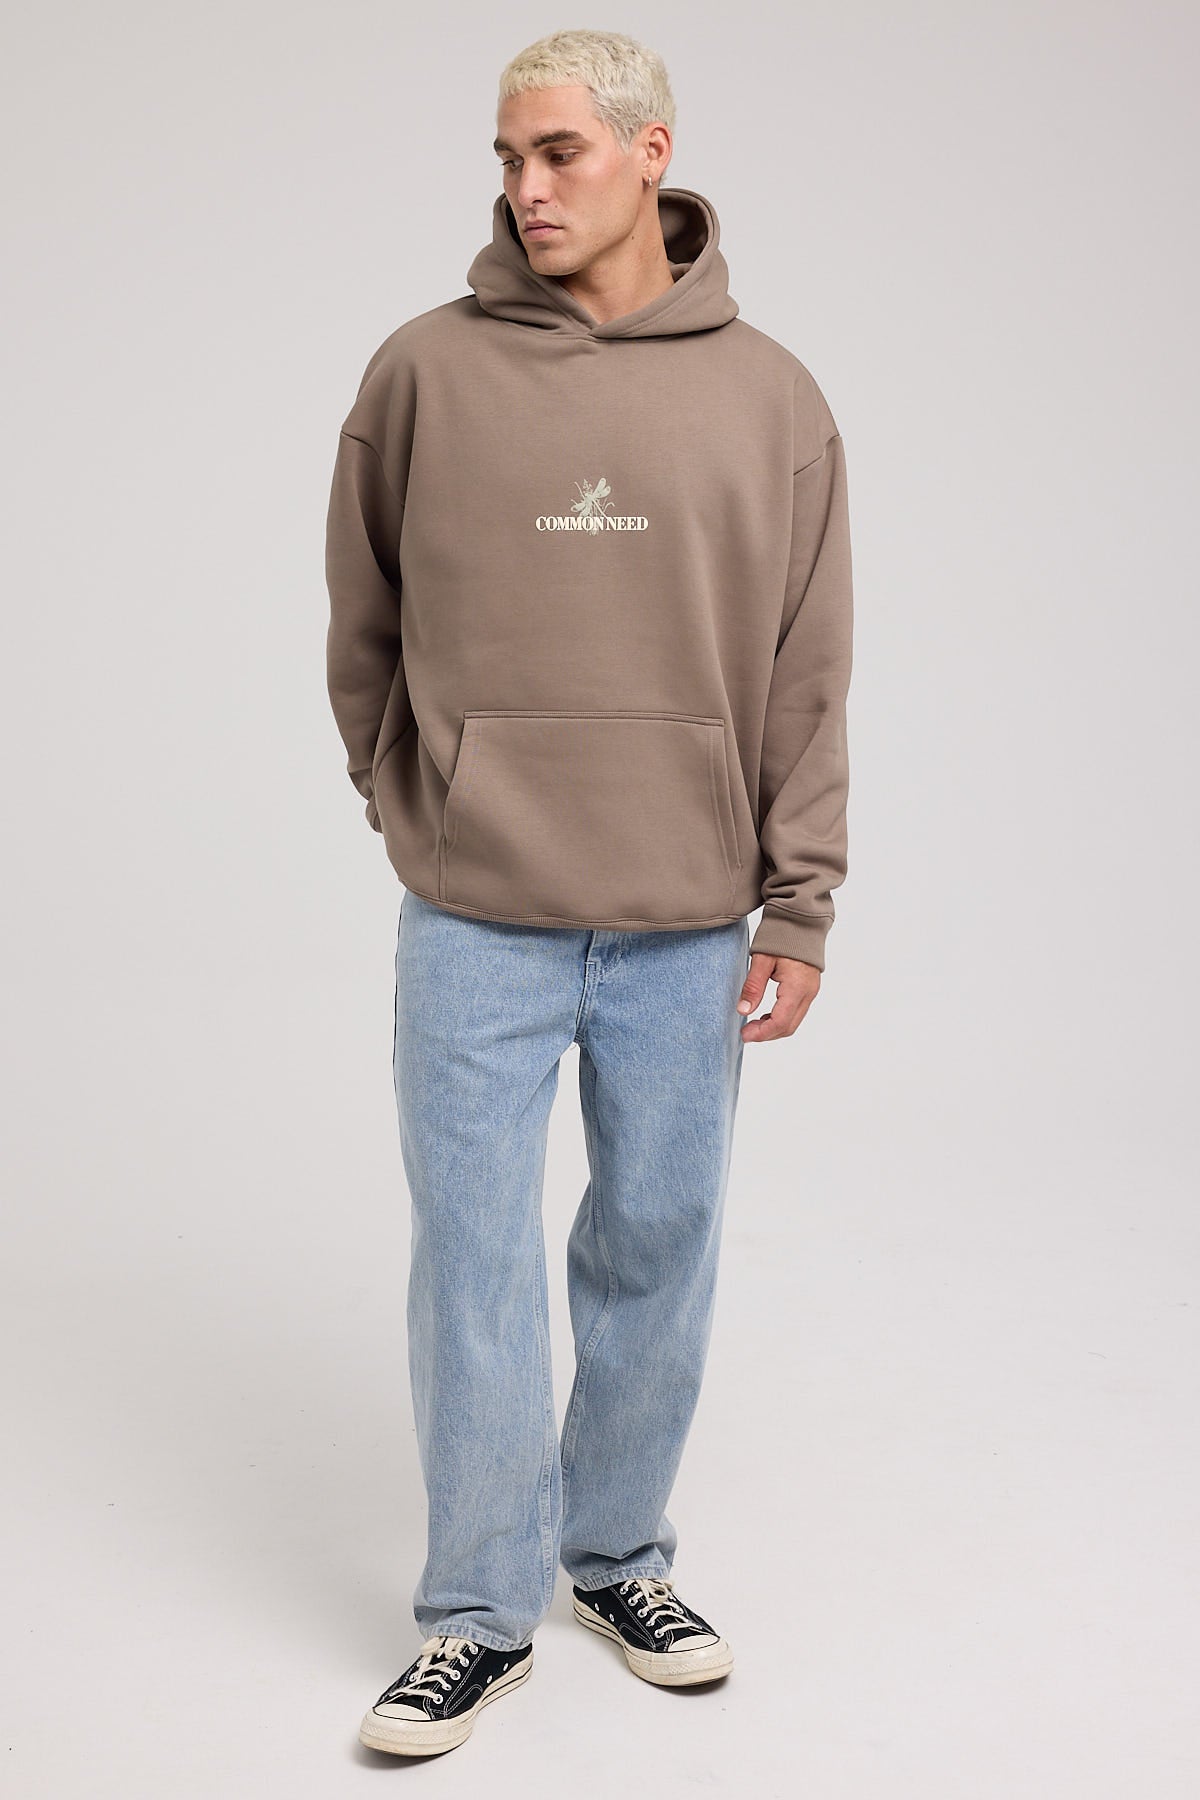 Common Need Agave Hoodie Brown